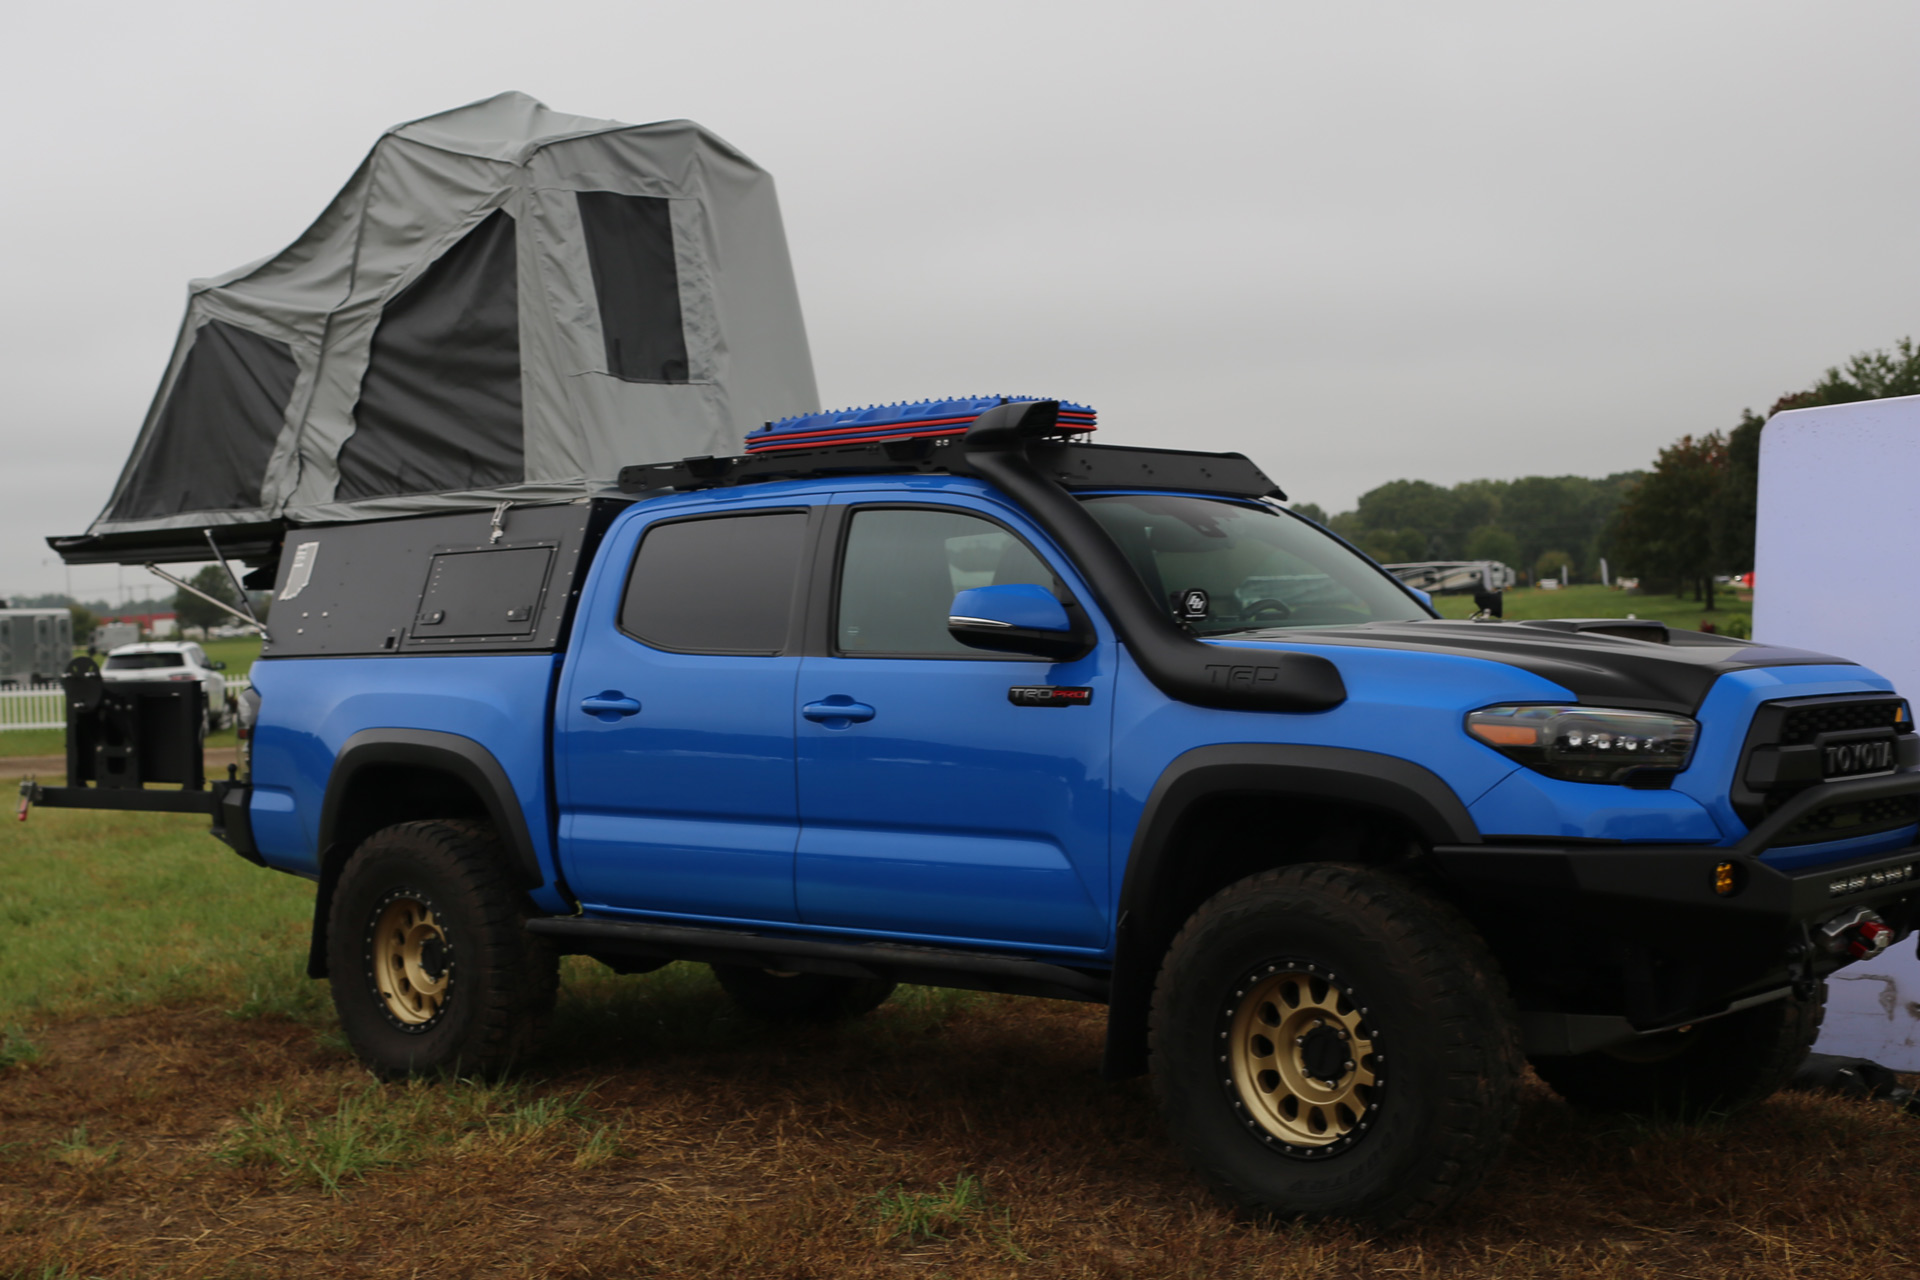 A blue Skinny Guy off-road truck is shown with a rooftop tent set up. The truck has rugged tires, a roof rack with additional storage, and various modifications for overlanding. The background features a grassy area with some trees and other campers.